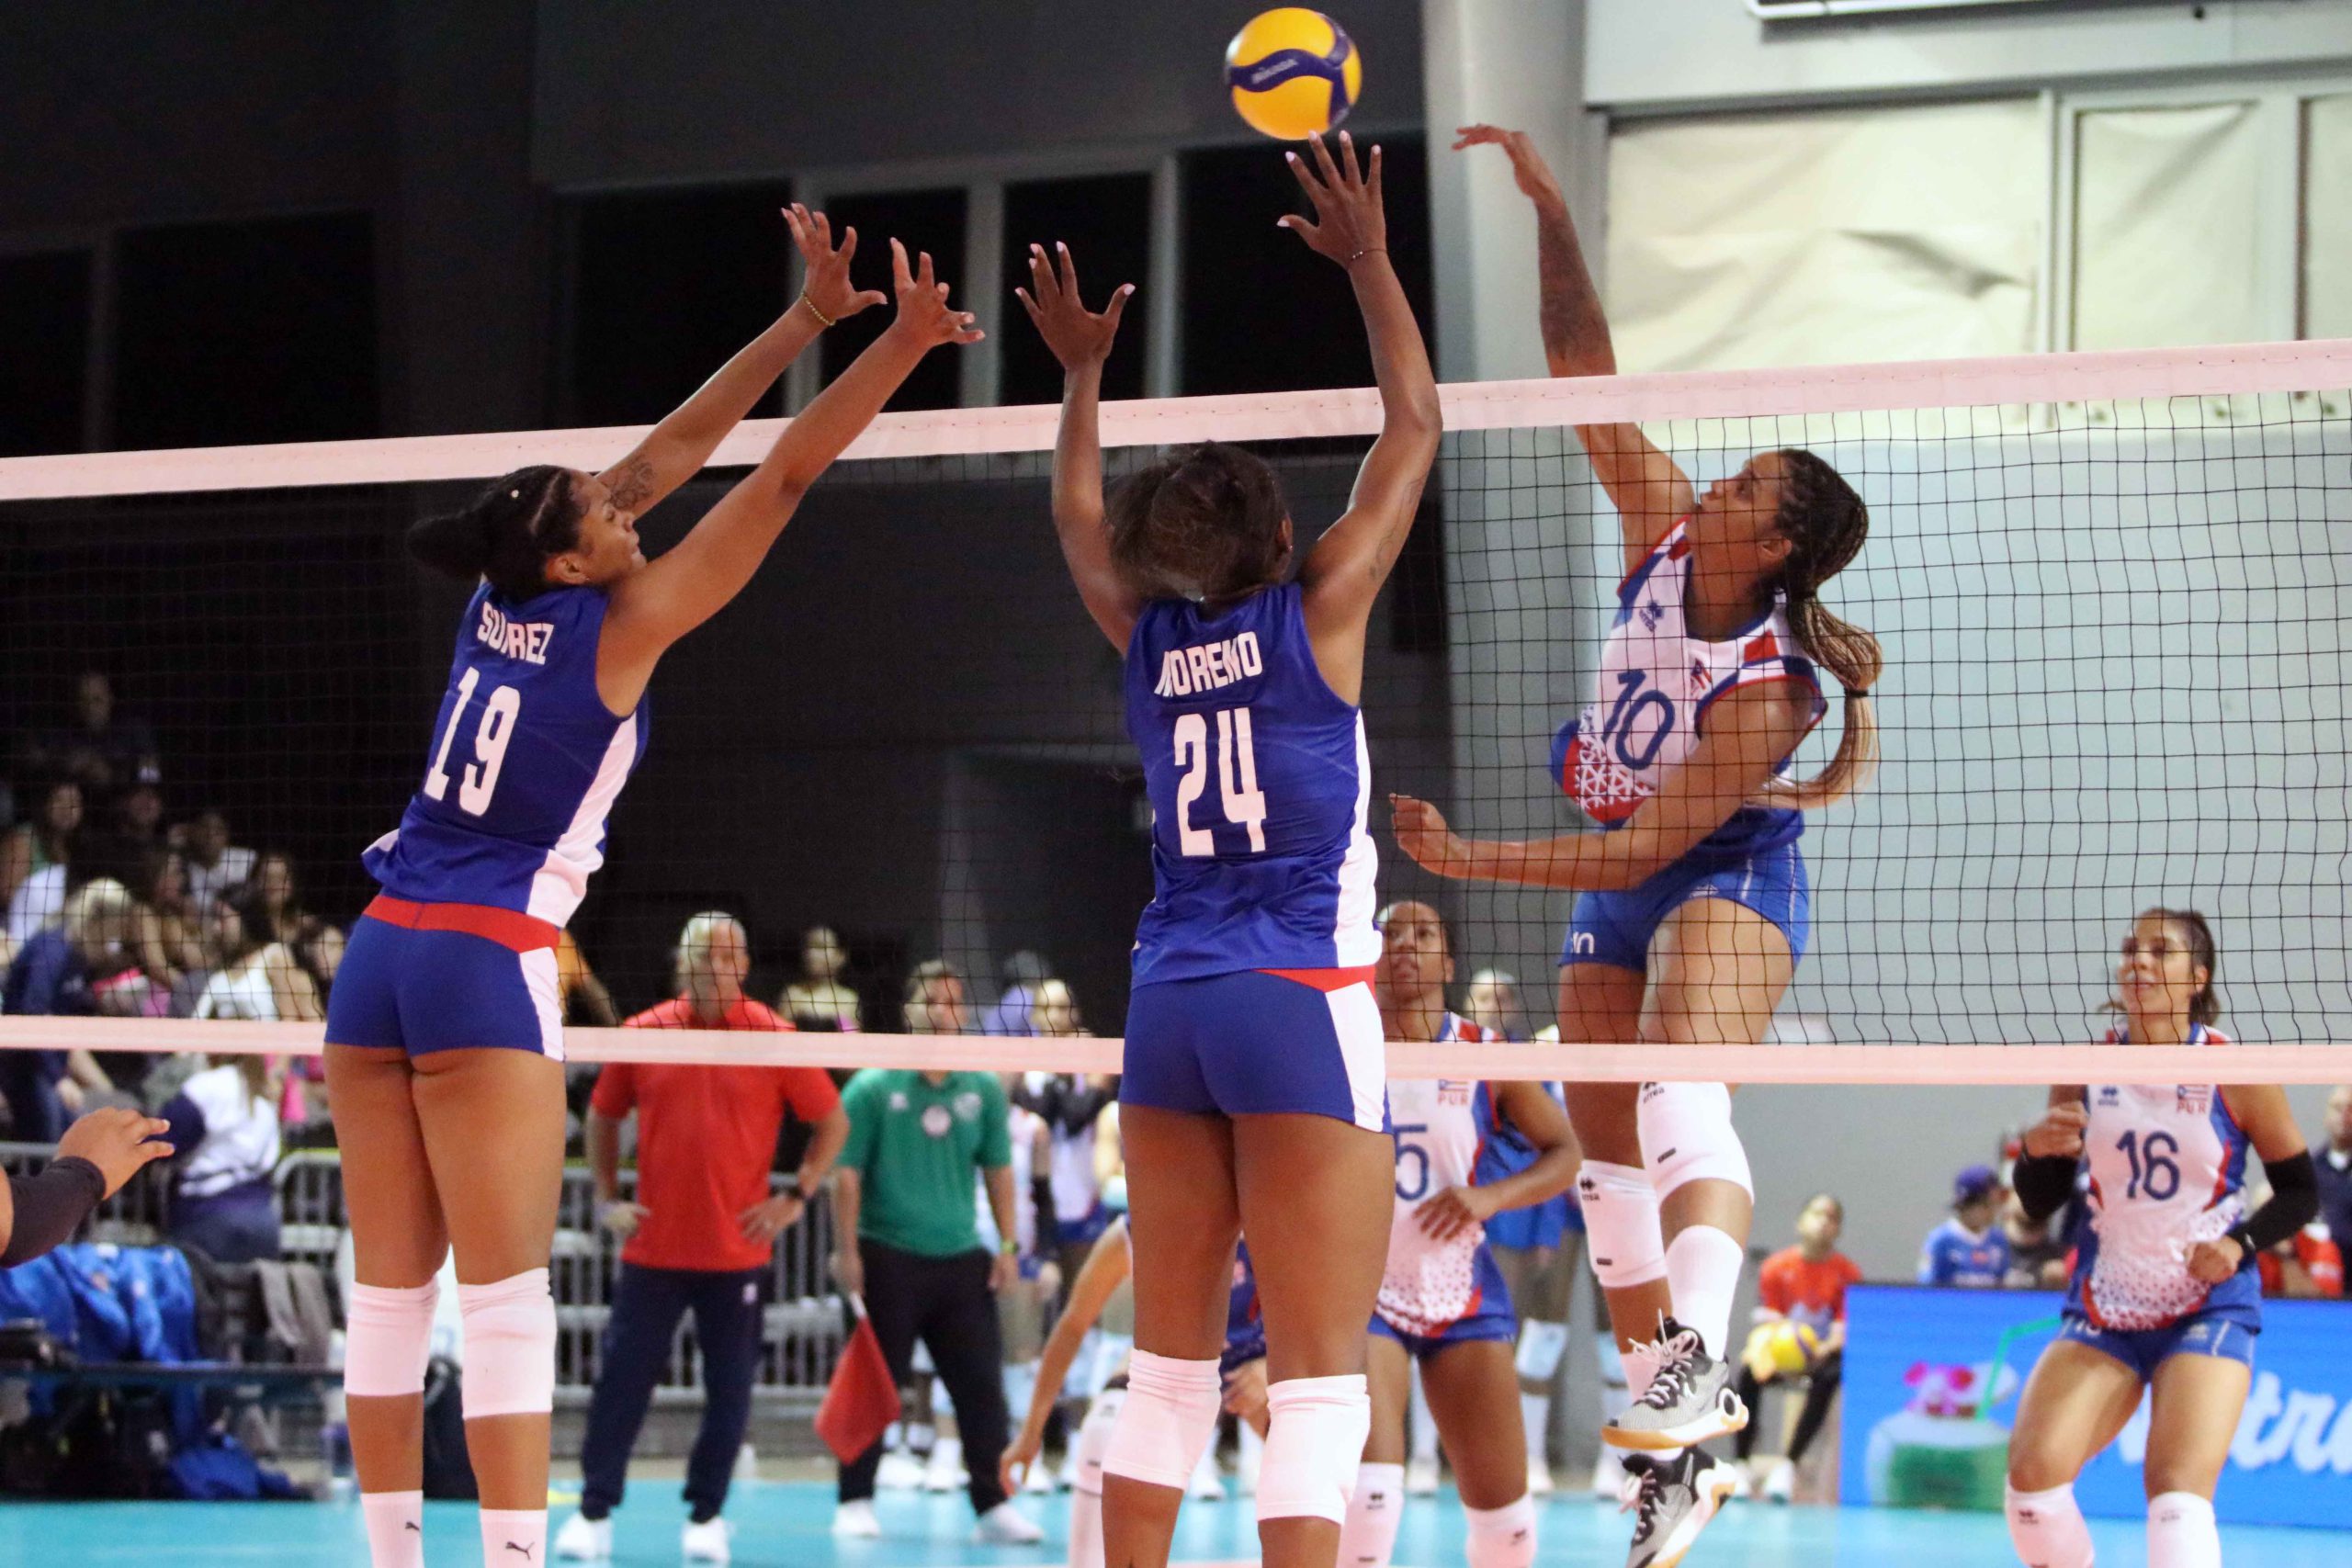 Puerto Rico beat Cuba and will play for the championship at NORCECA Women’s Final Four